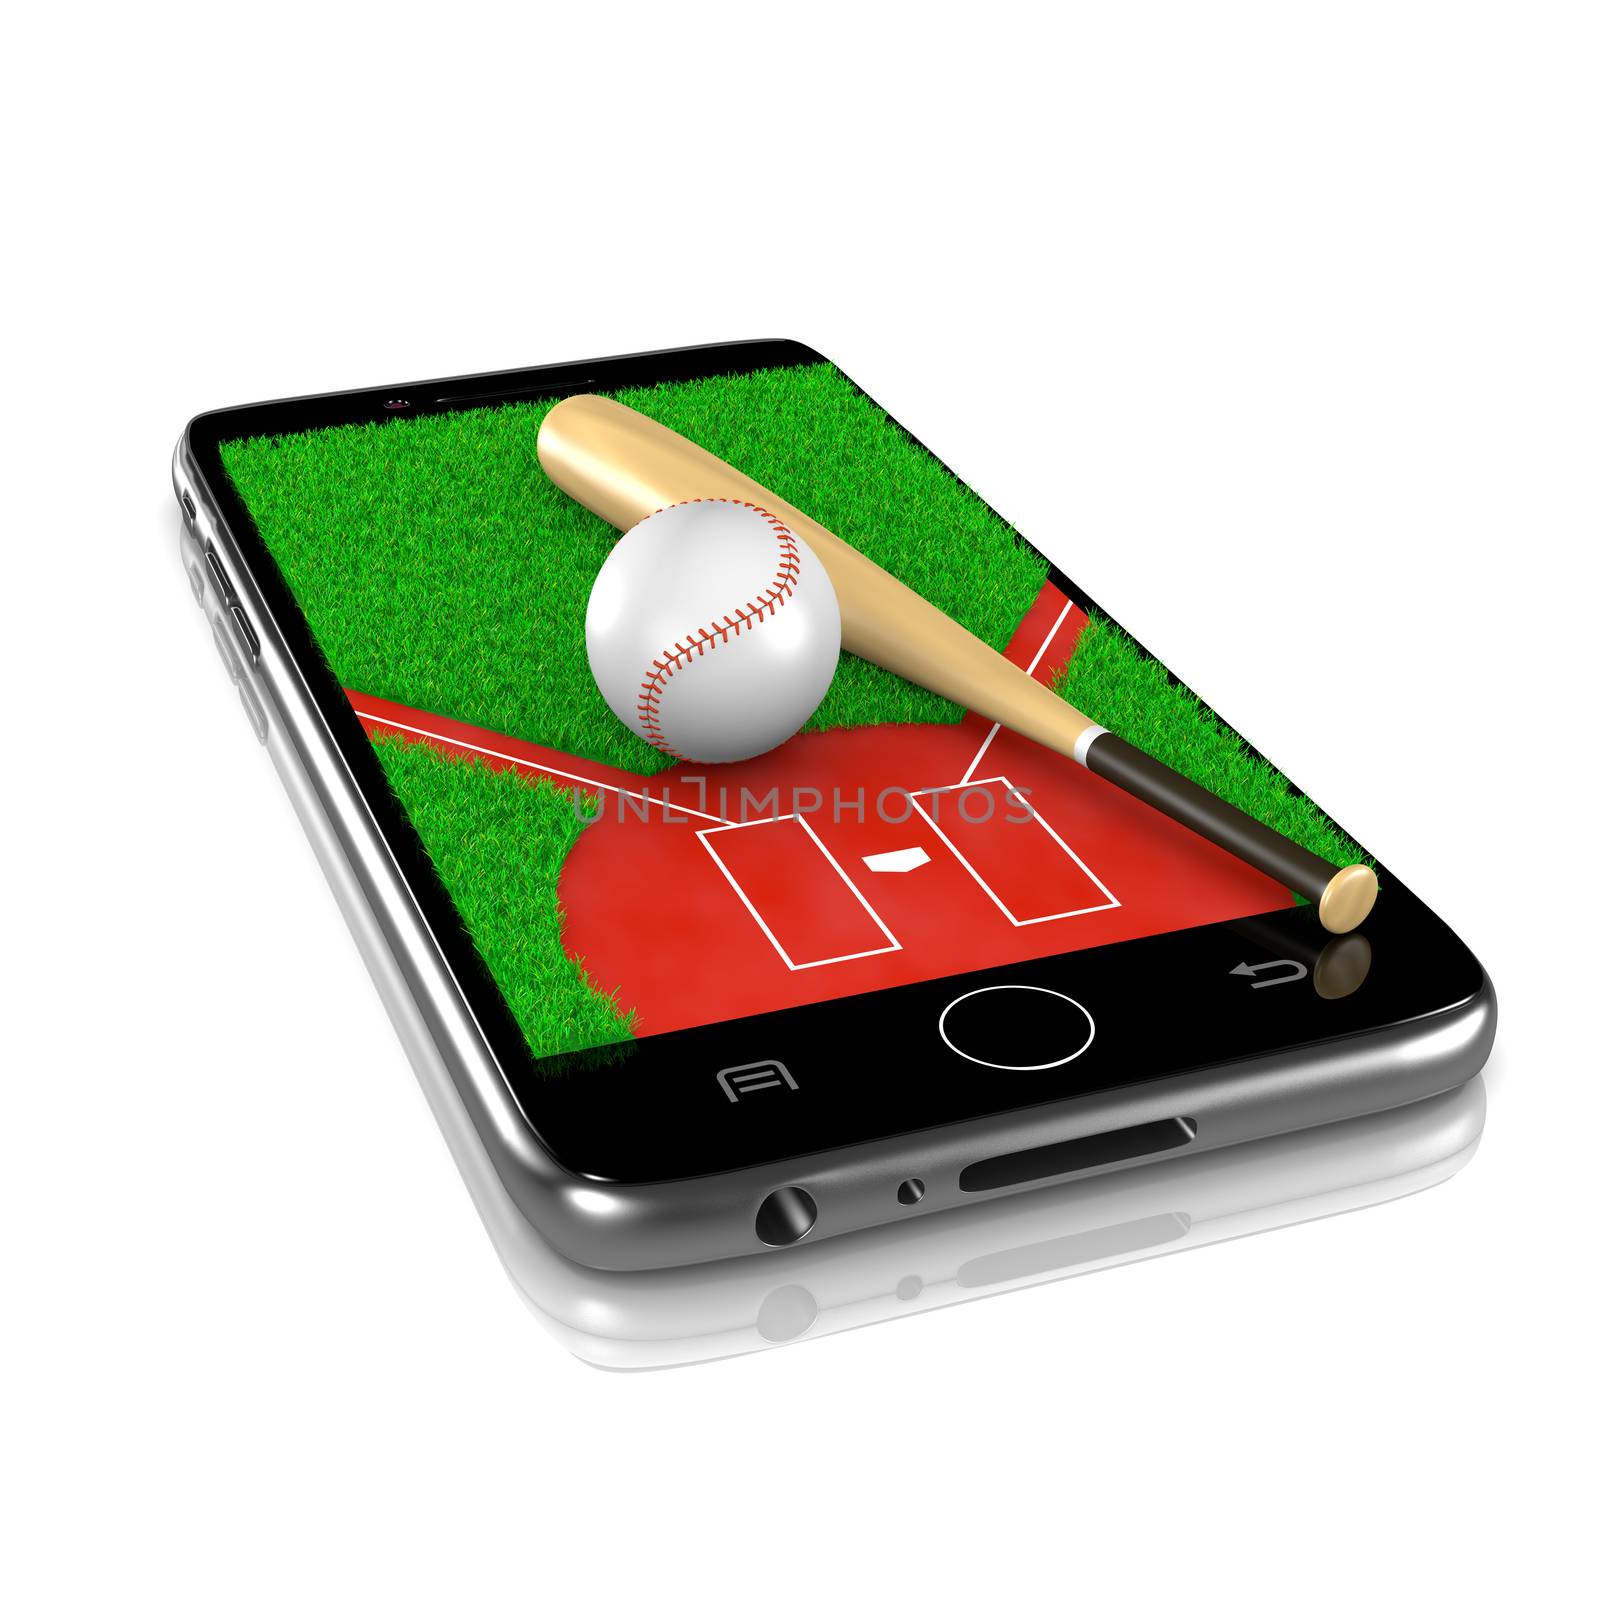 Baseball Field with Ball and Bat on Smartphone Display 3D Illustration Isolated on White Background